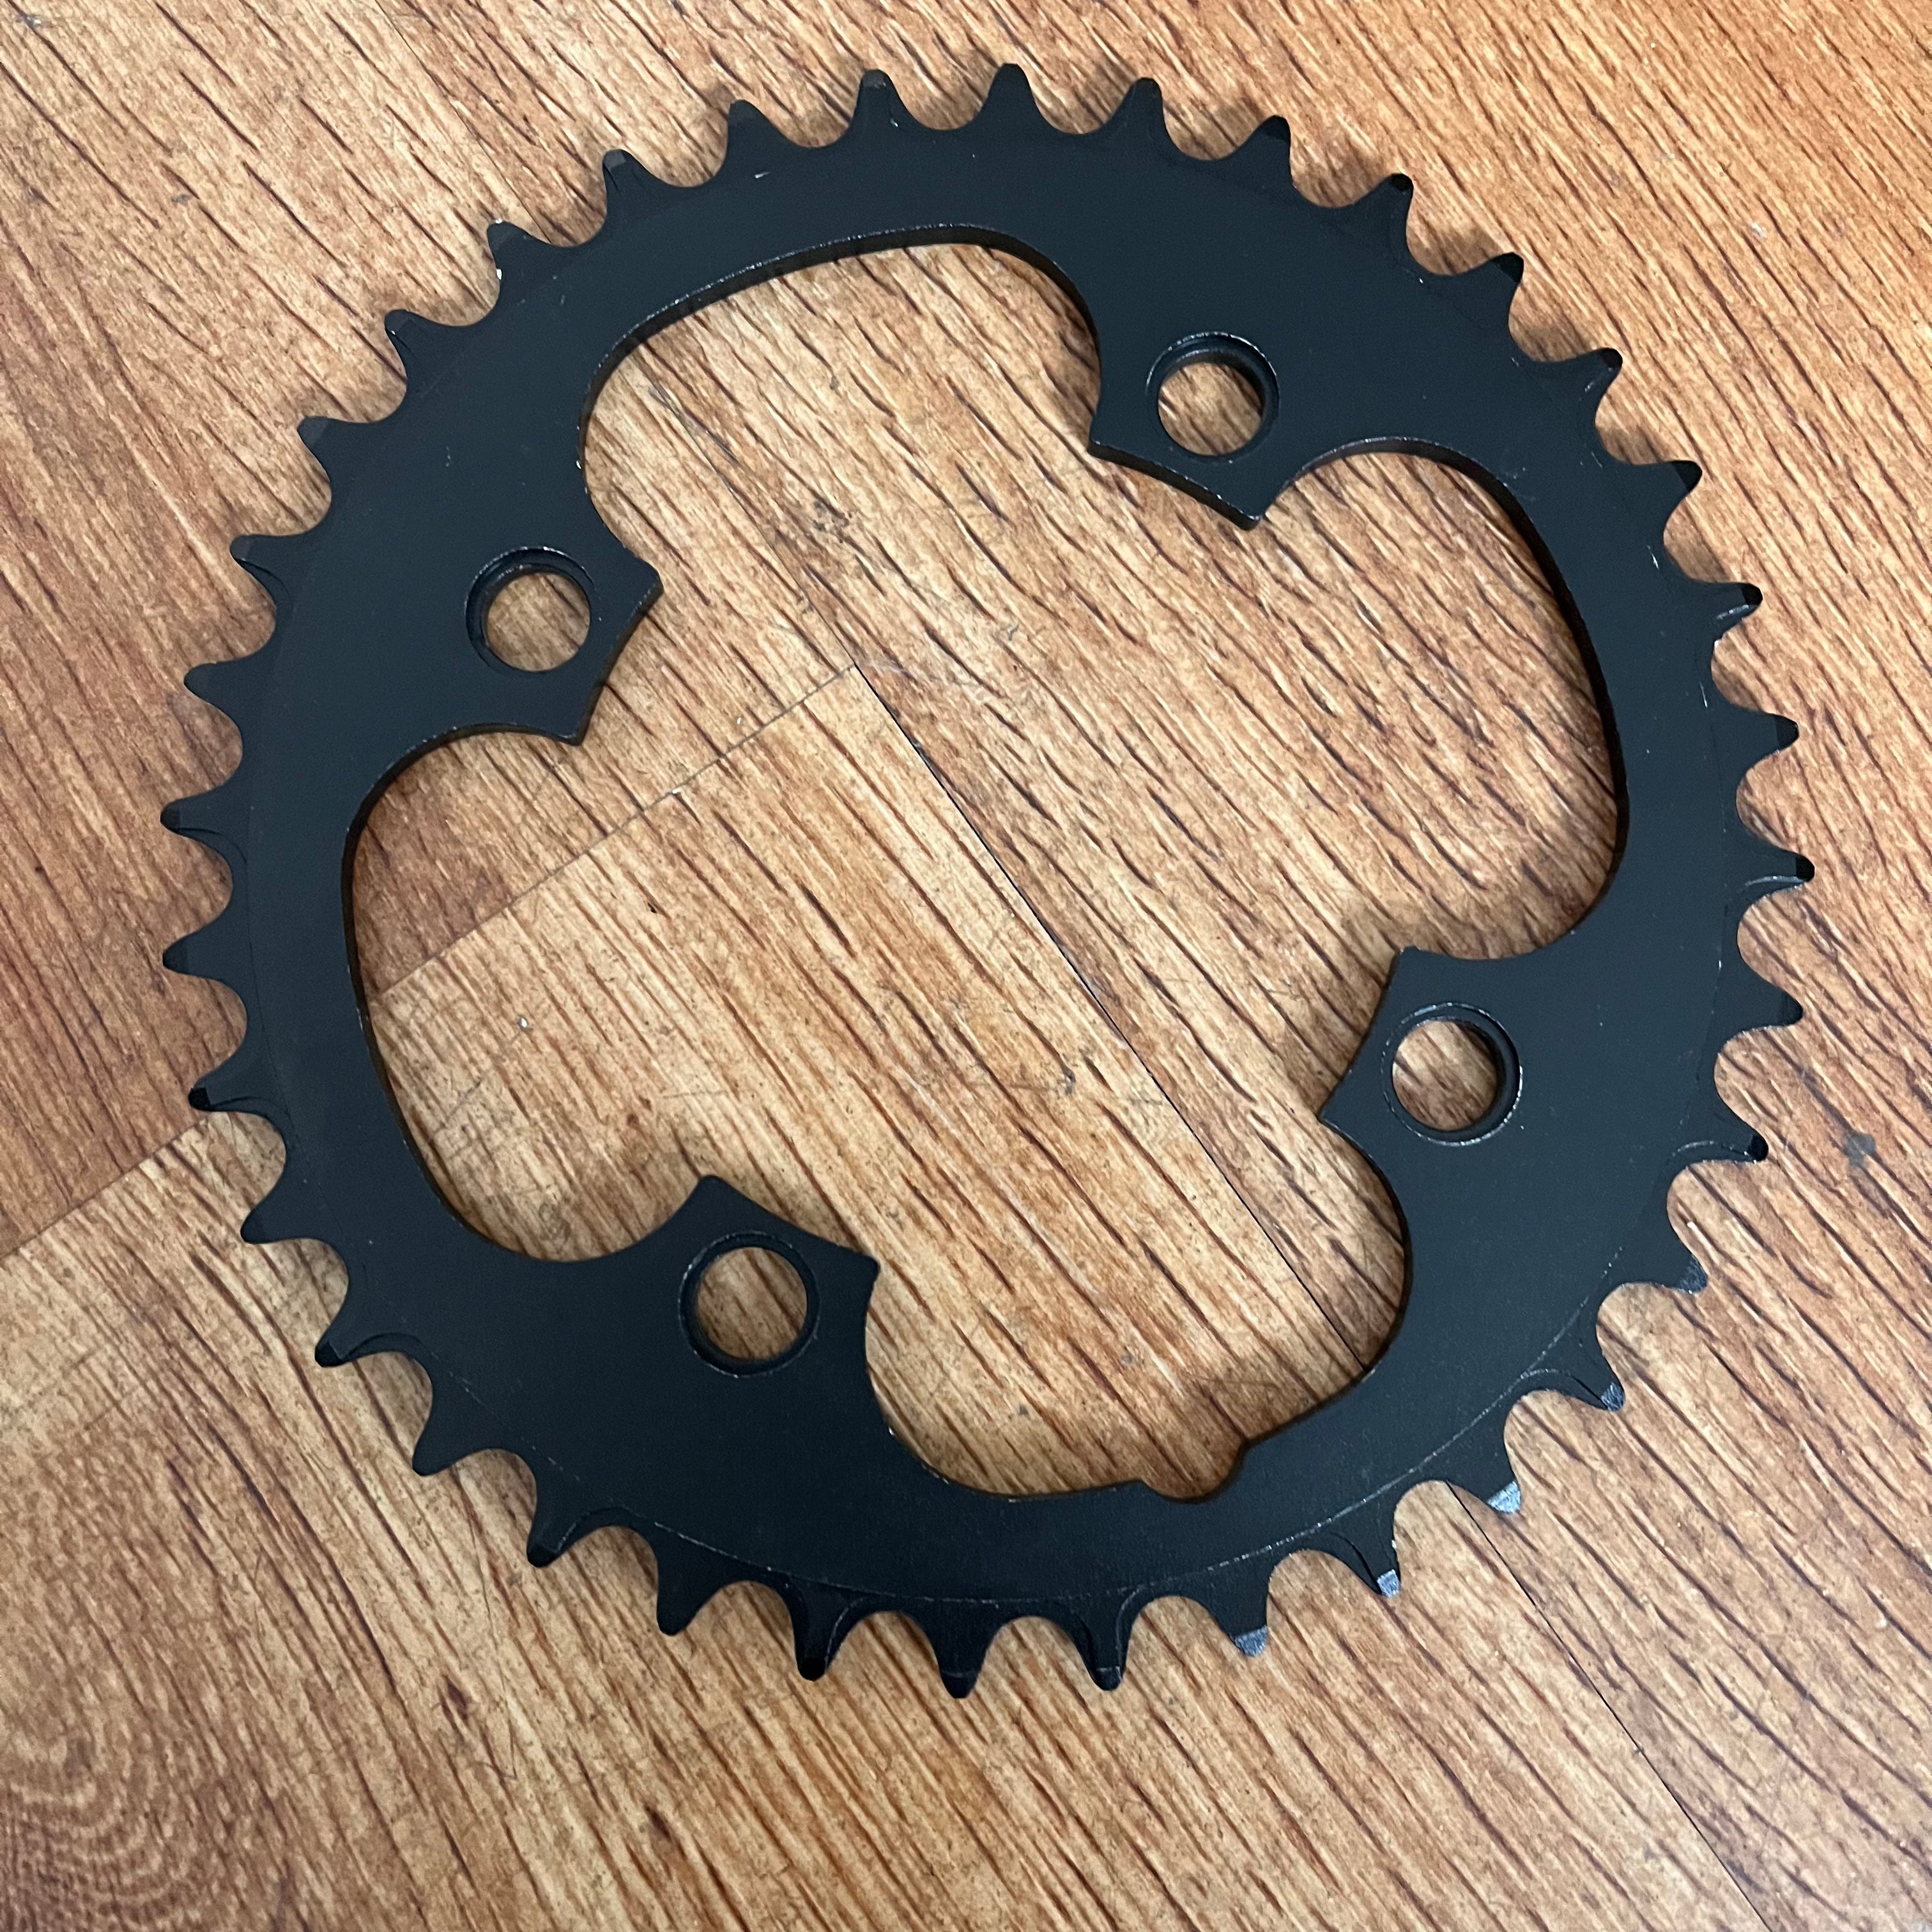 First Components R-MXX2 NW 94mm BCD 36t Chainring - this is a photo showing the chainring in our clearance section.